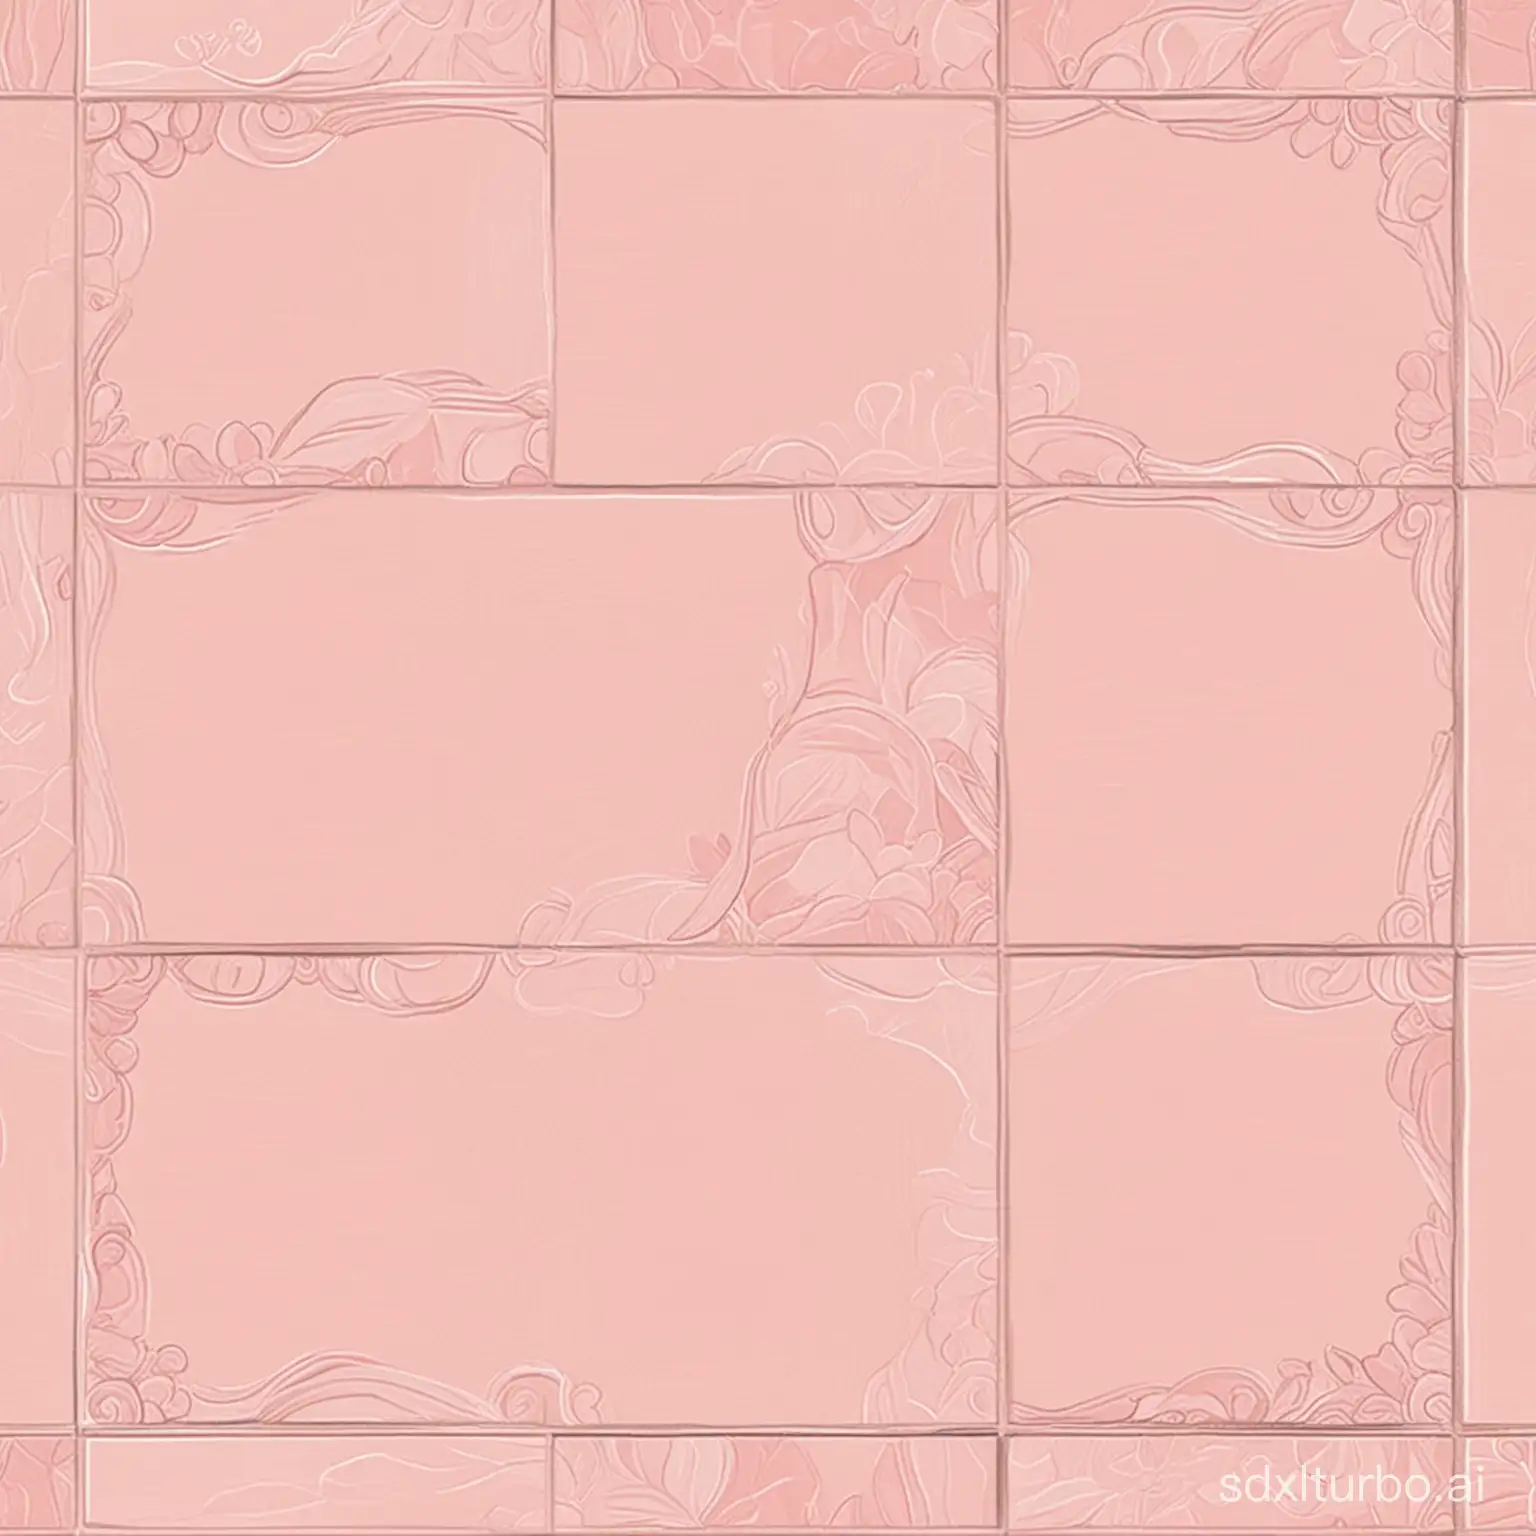 HandDrawn-Tile-Panel-with-Colorful-Graphics-on-Pale-Pink-Background